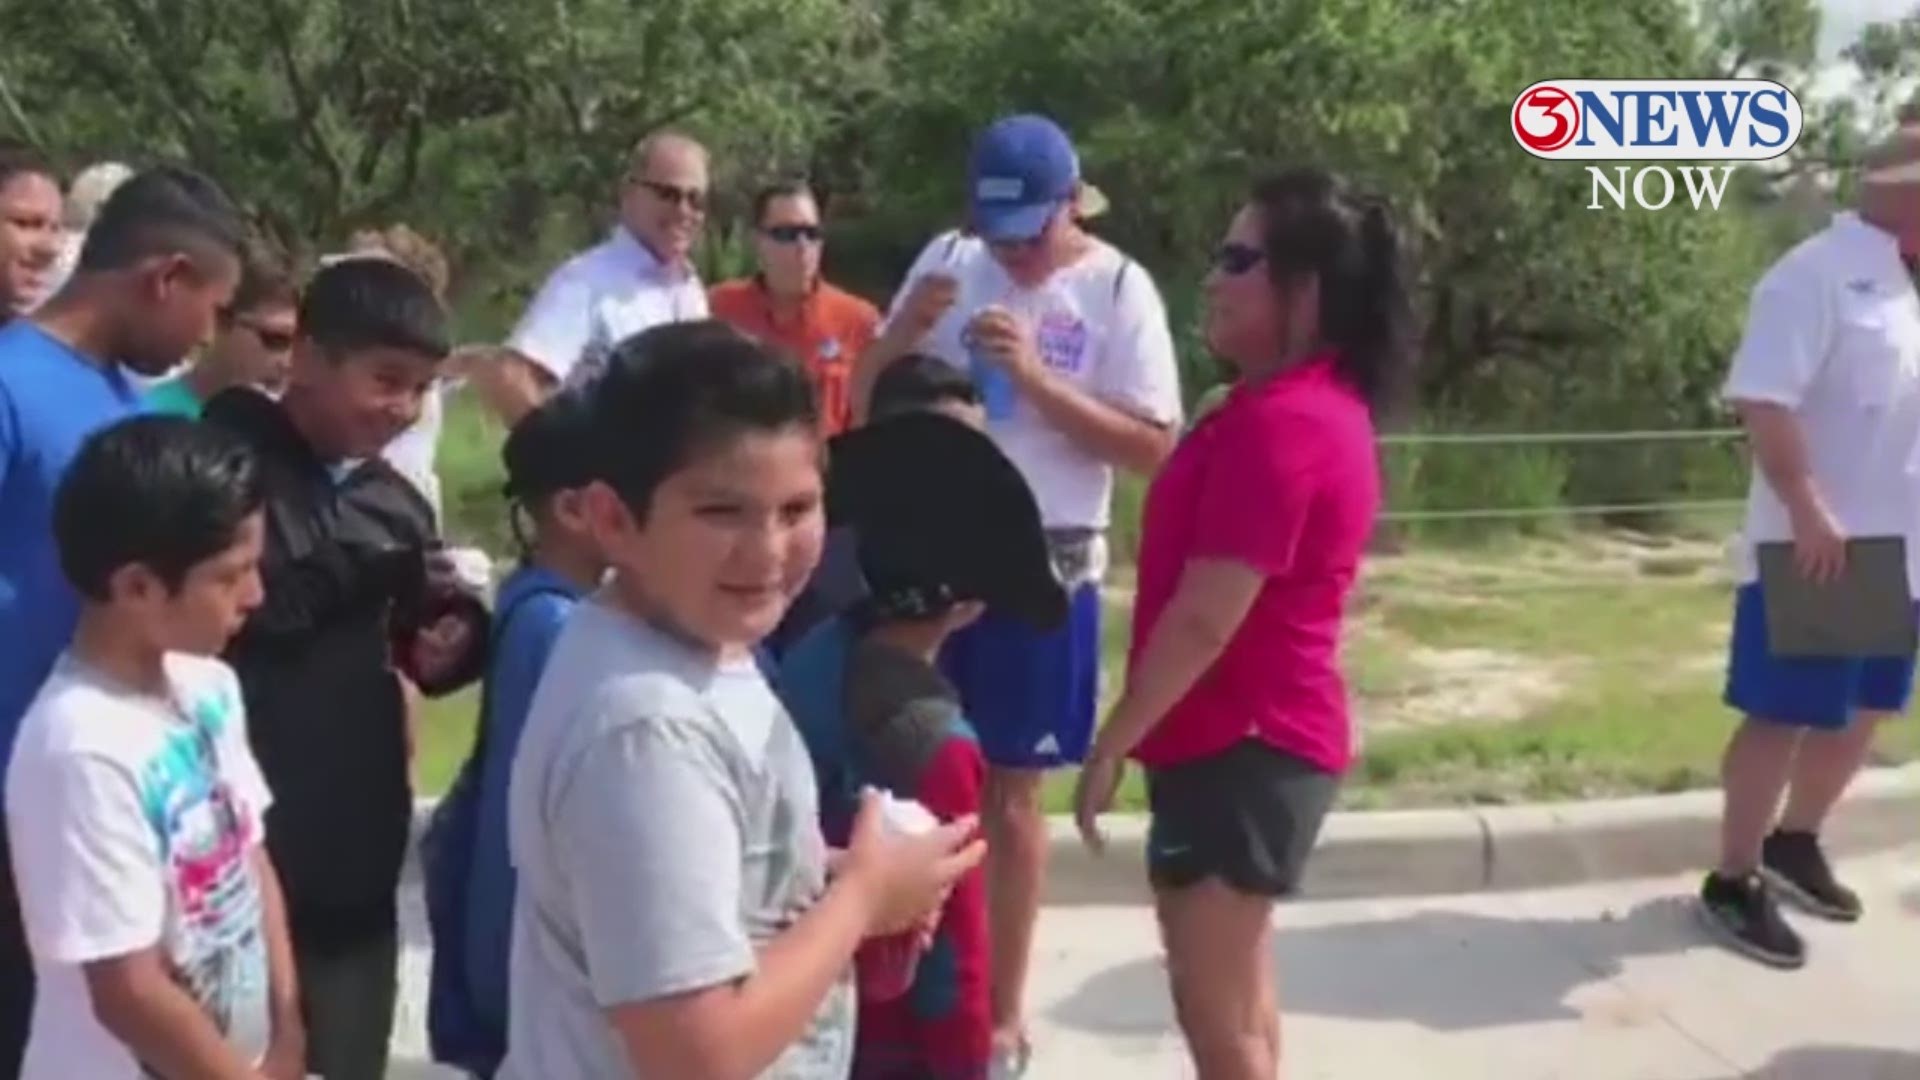 Rockport's Camp Aranzazu, a camp for children and adults with special needs and chronic illnesses, celebrated Monday the completion of a new 600-foot bridge connecting their main camp area to 27 acres on Copano Bay.